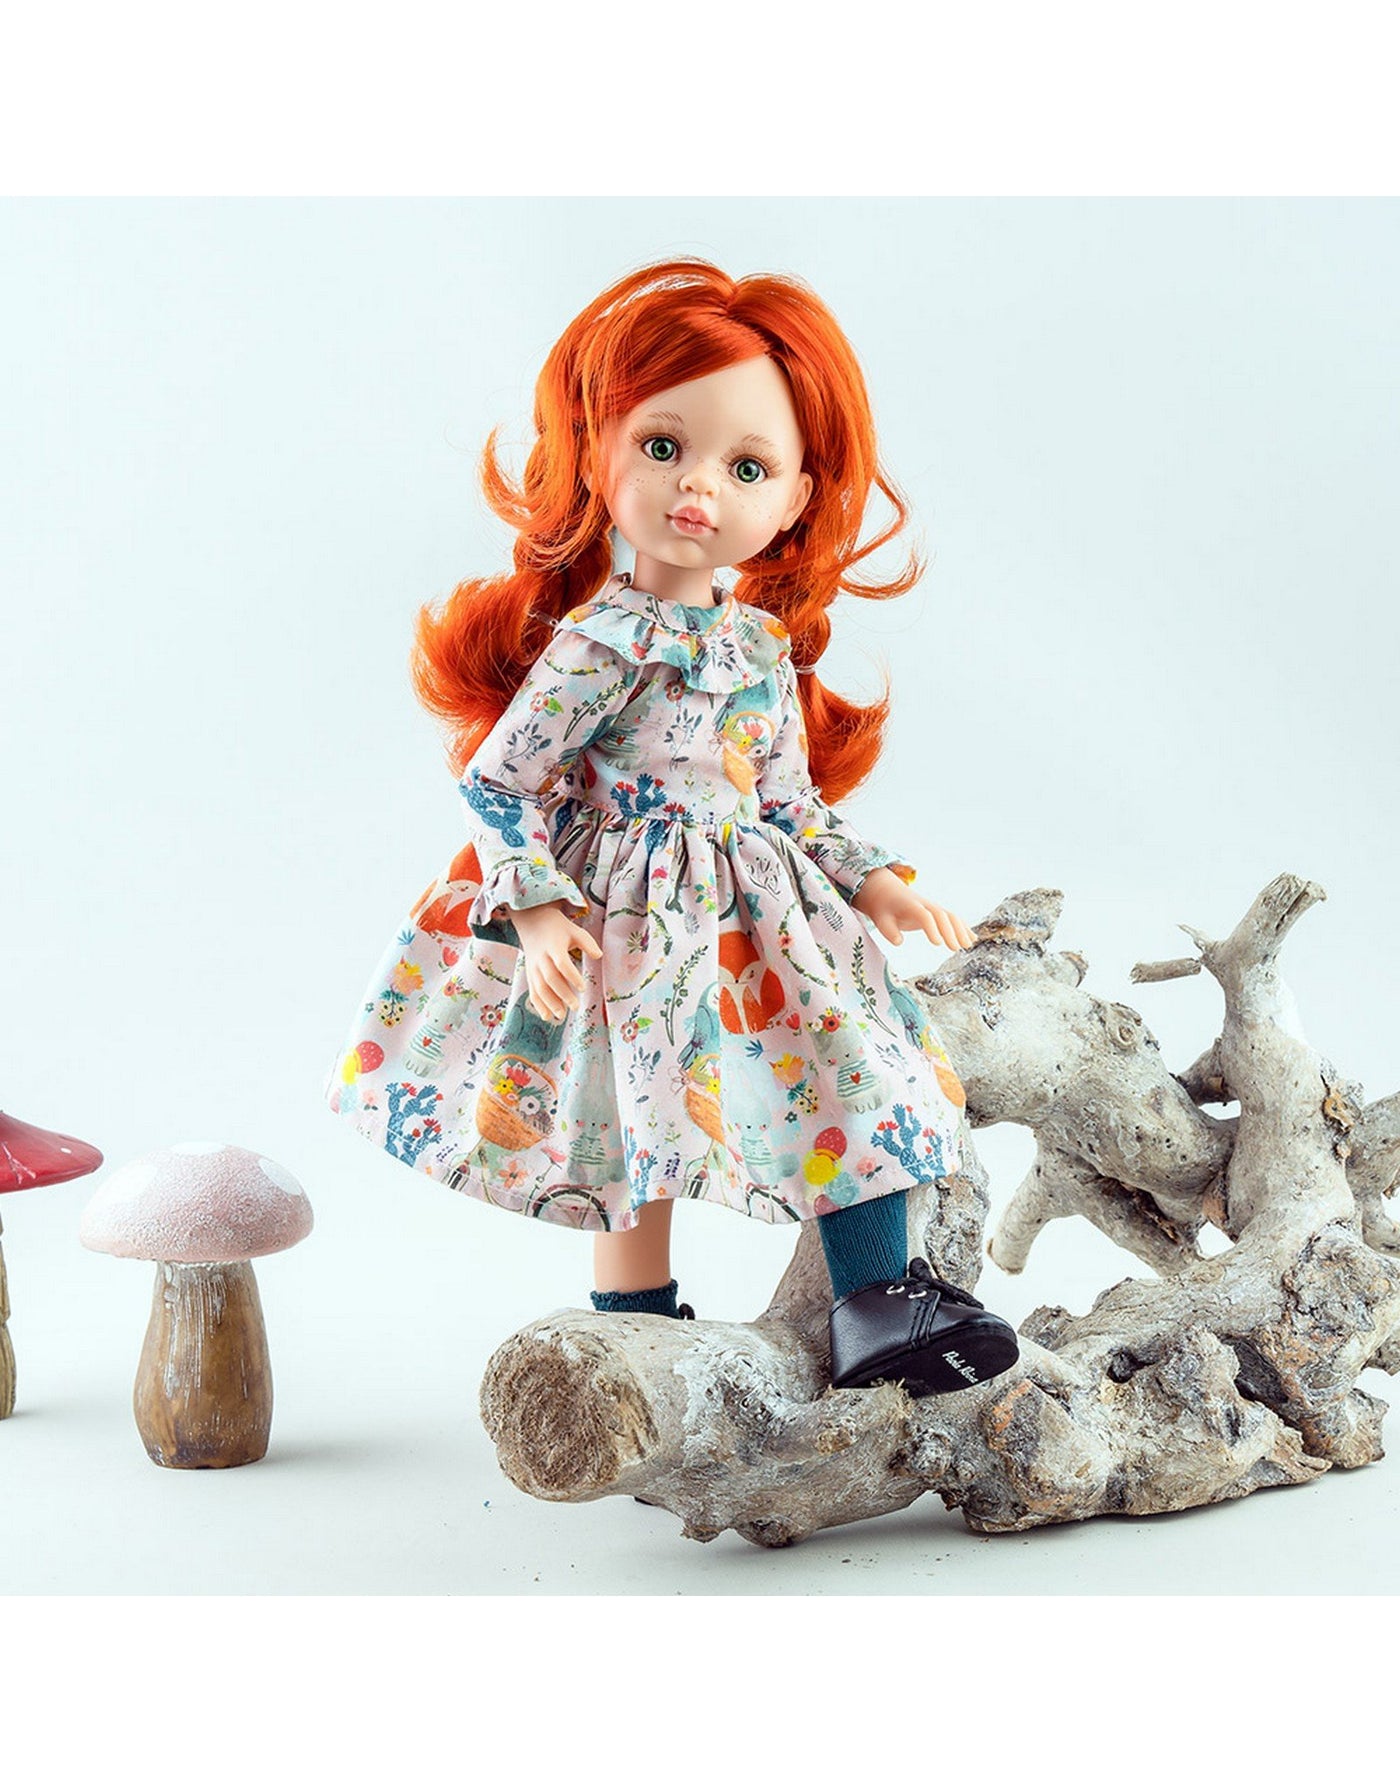 Las Amigas Doll Clothing - Walk in the Forest dress - Paola Reina